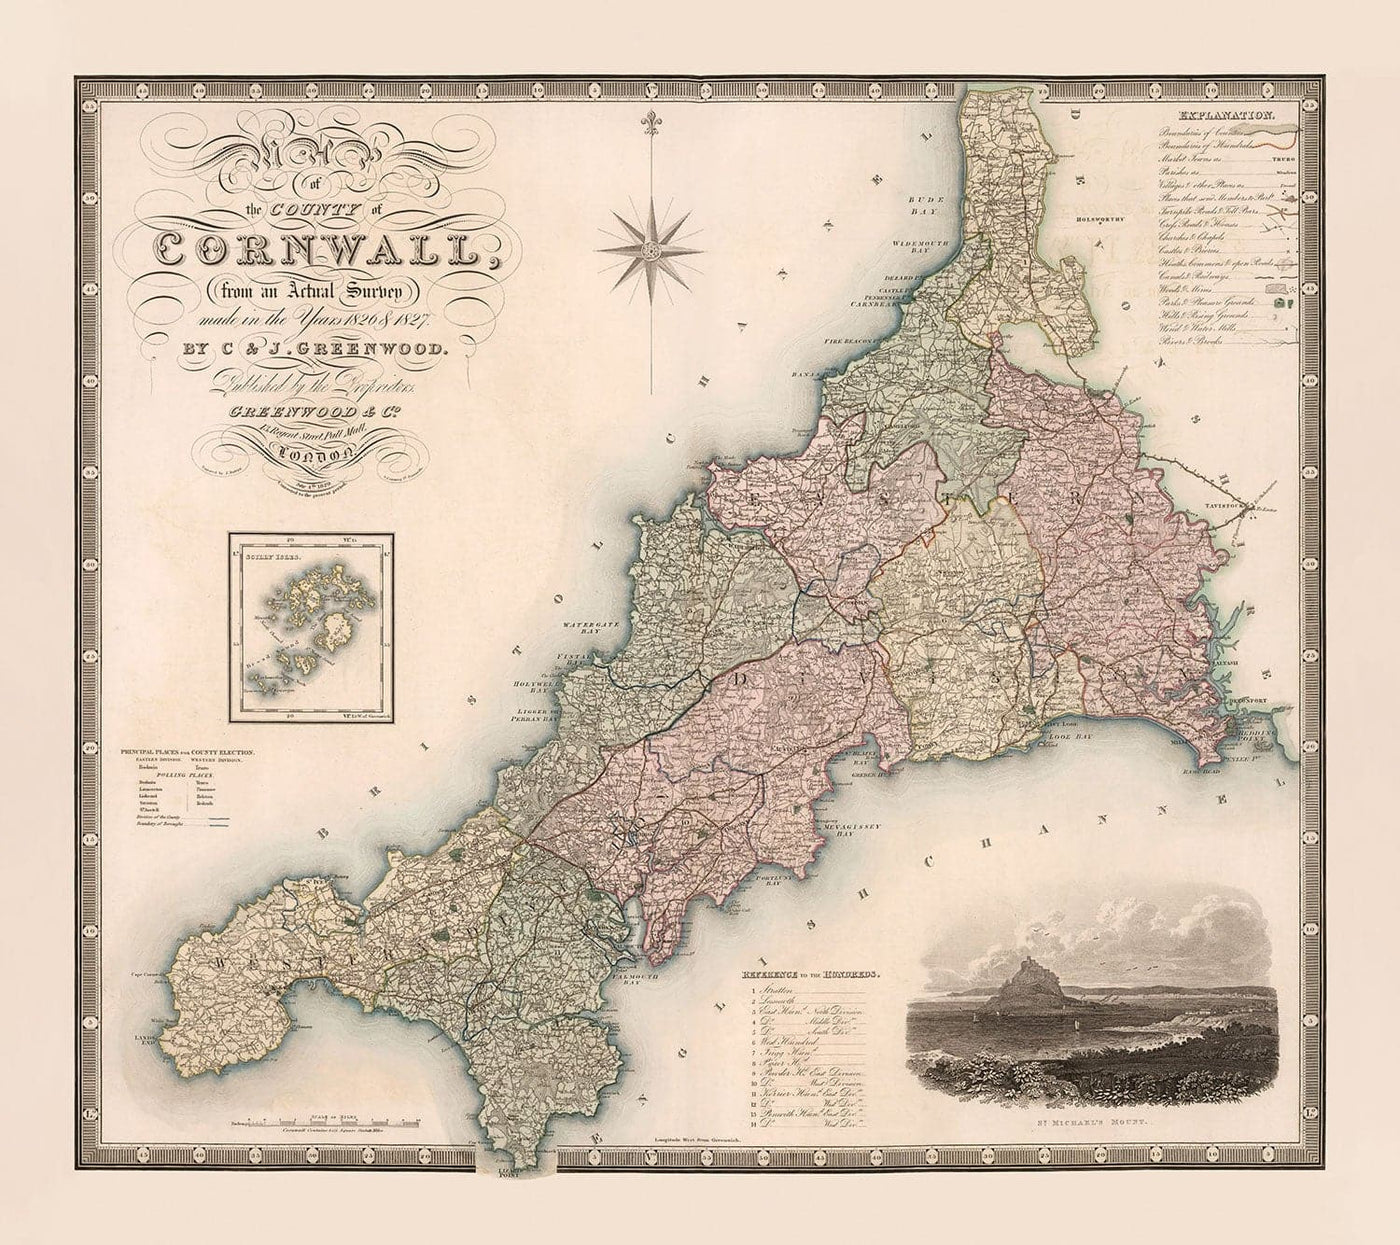 Ancienne carte de Cornwall et Scilly, 1829 par Greenwood & Co. - Penzance, St Ives, Plymouth, Terres fines, Padstow